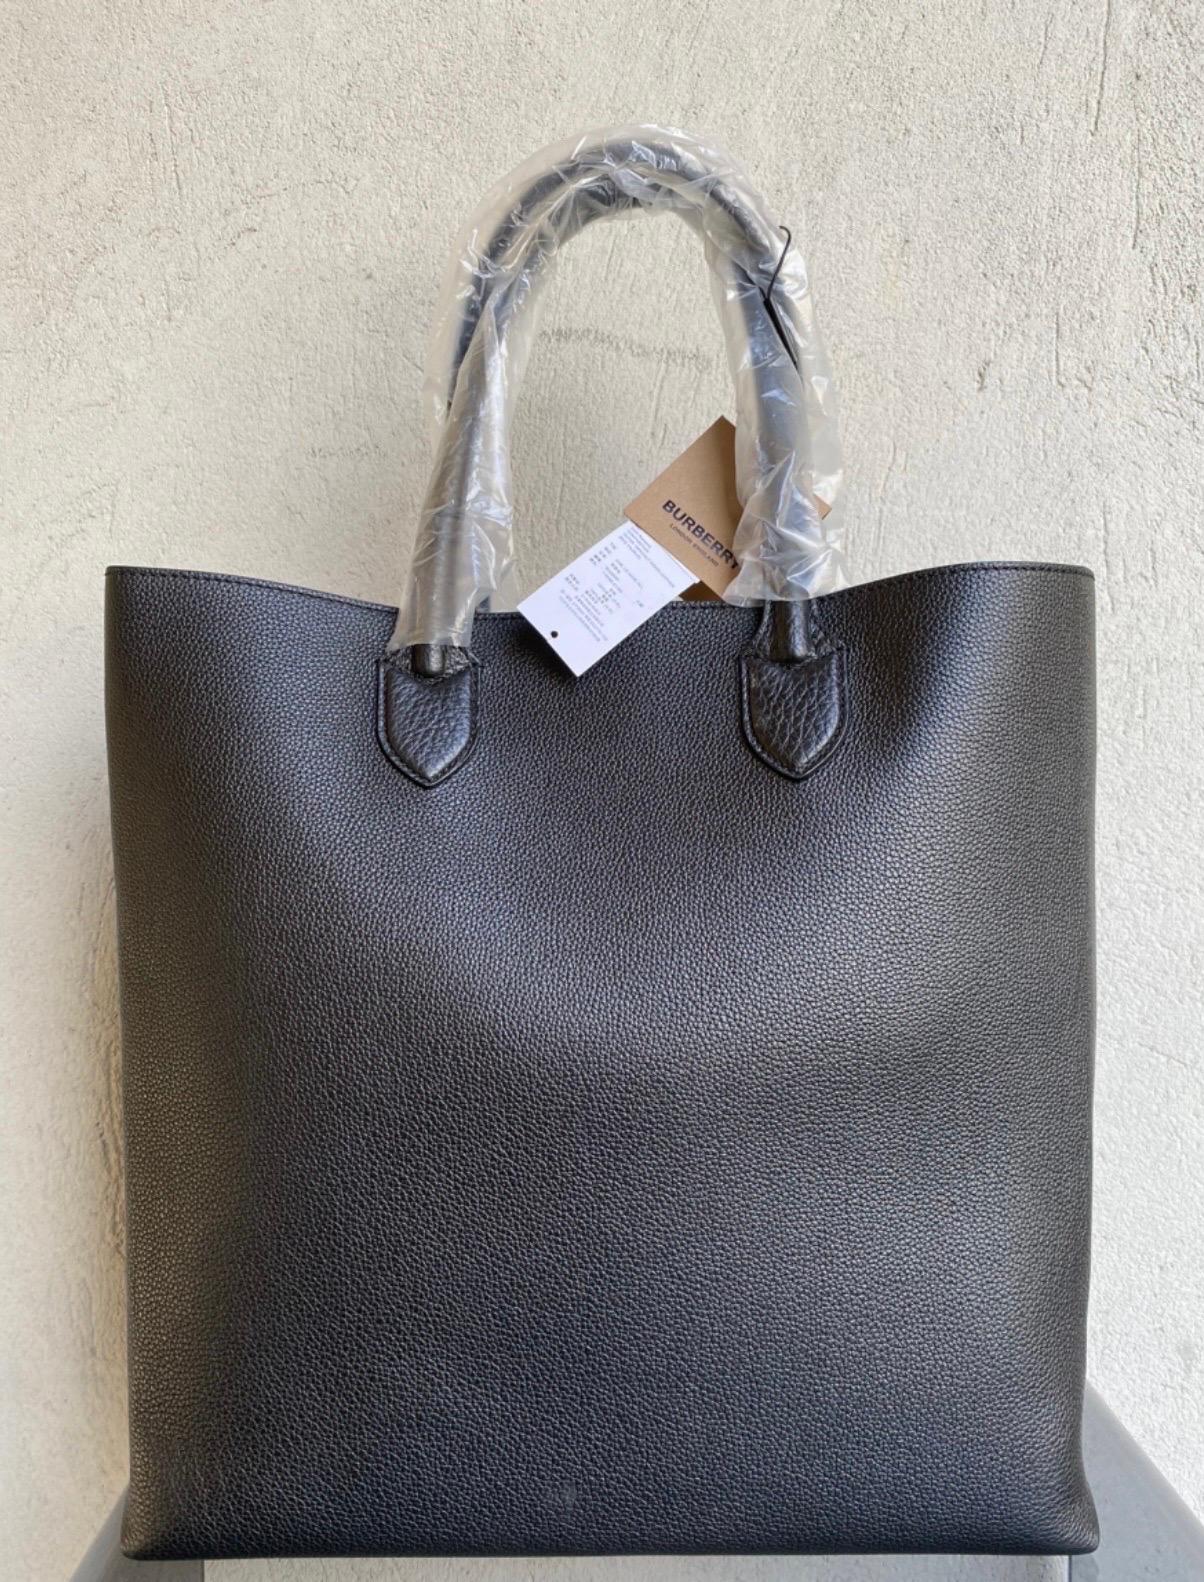 Burberry black leather Shopper In New Condition For Sale In Carnate, IT